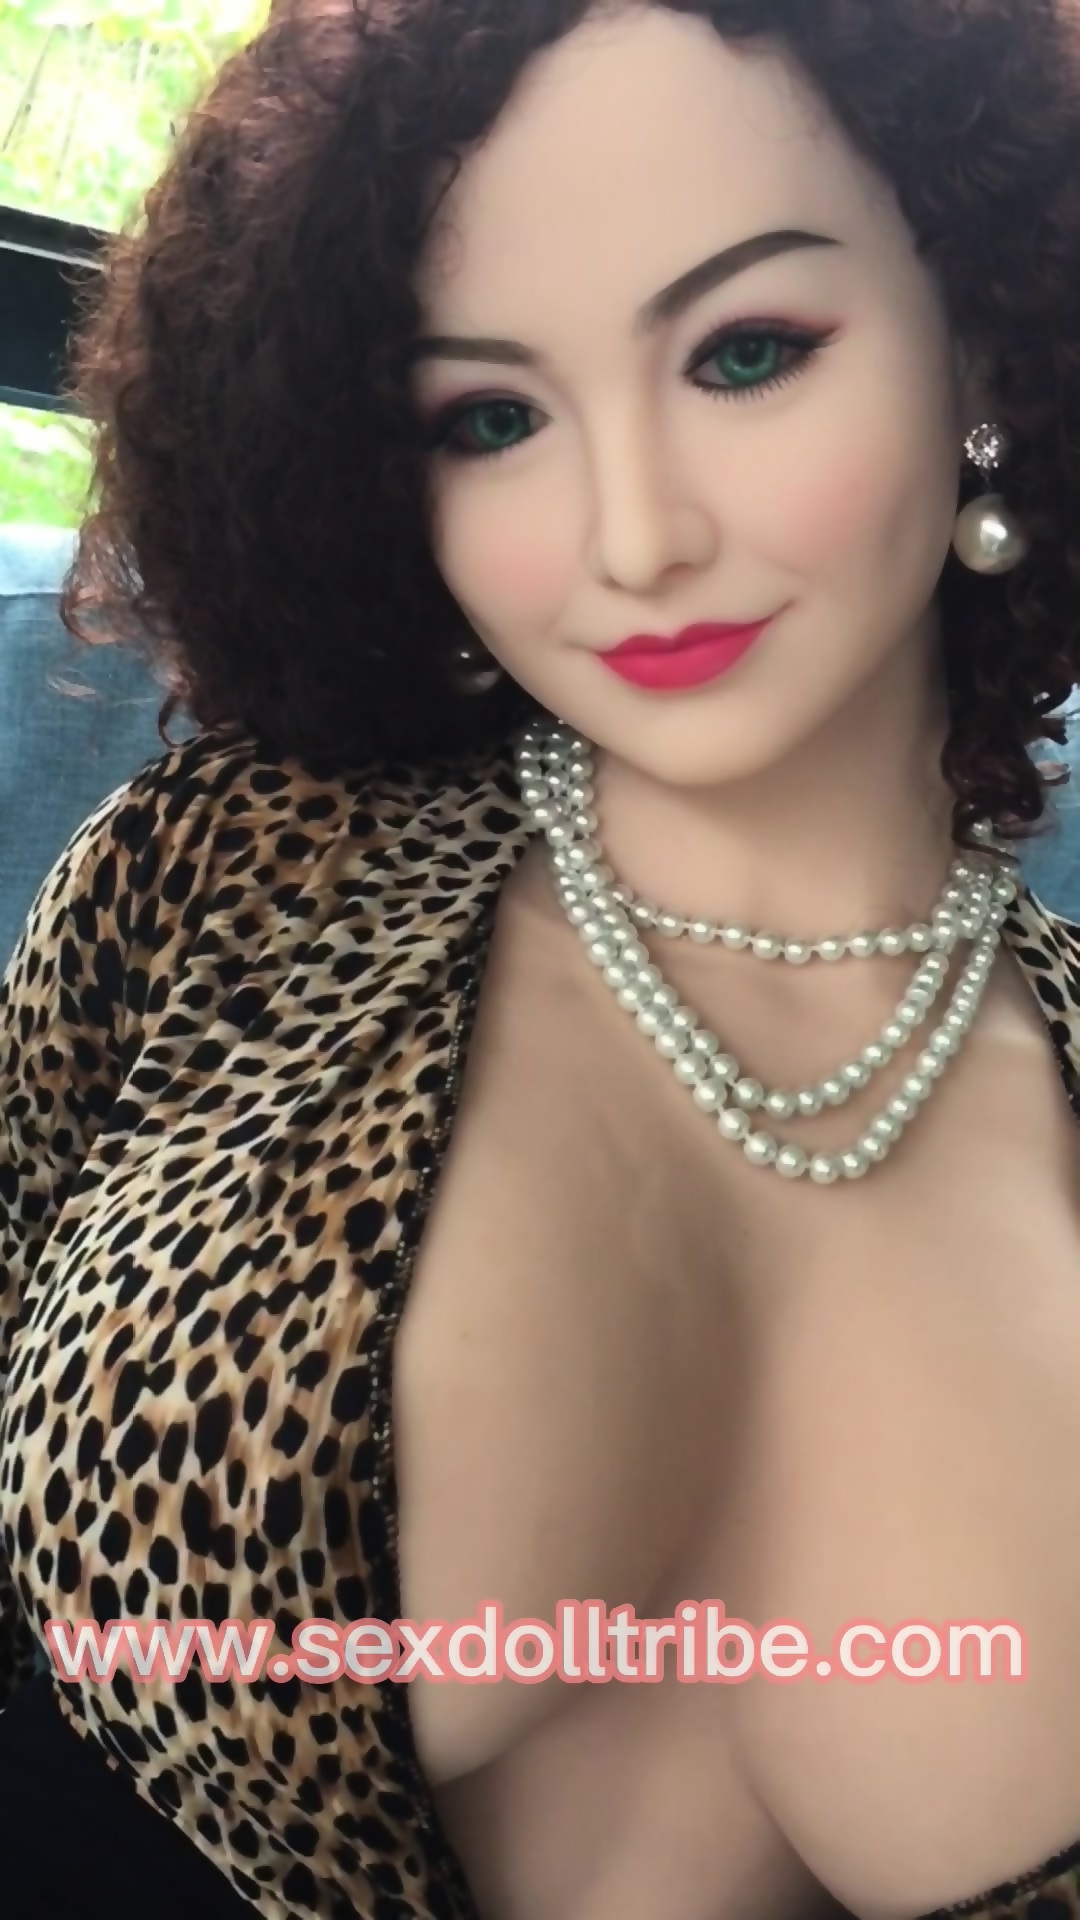 Busty Sex Doll Polly Lina Paige Eporner 